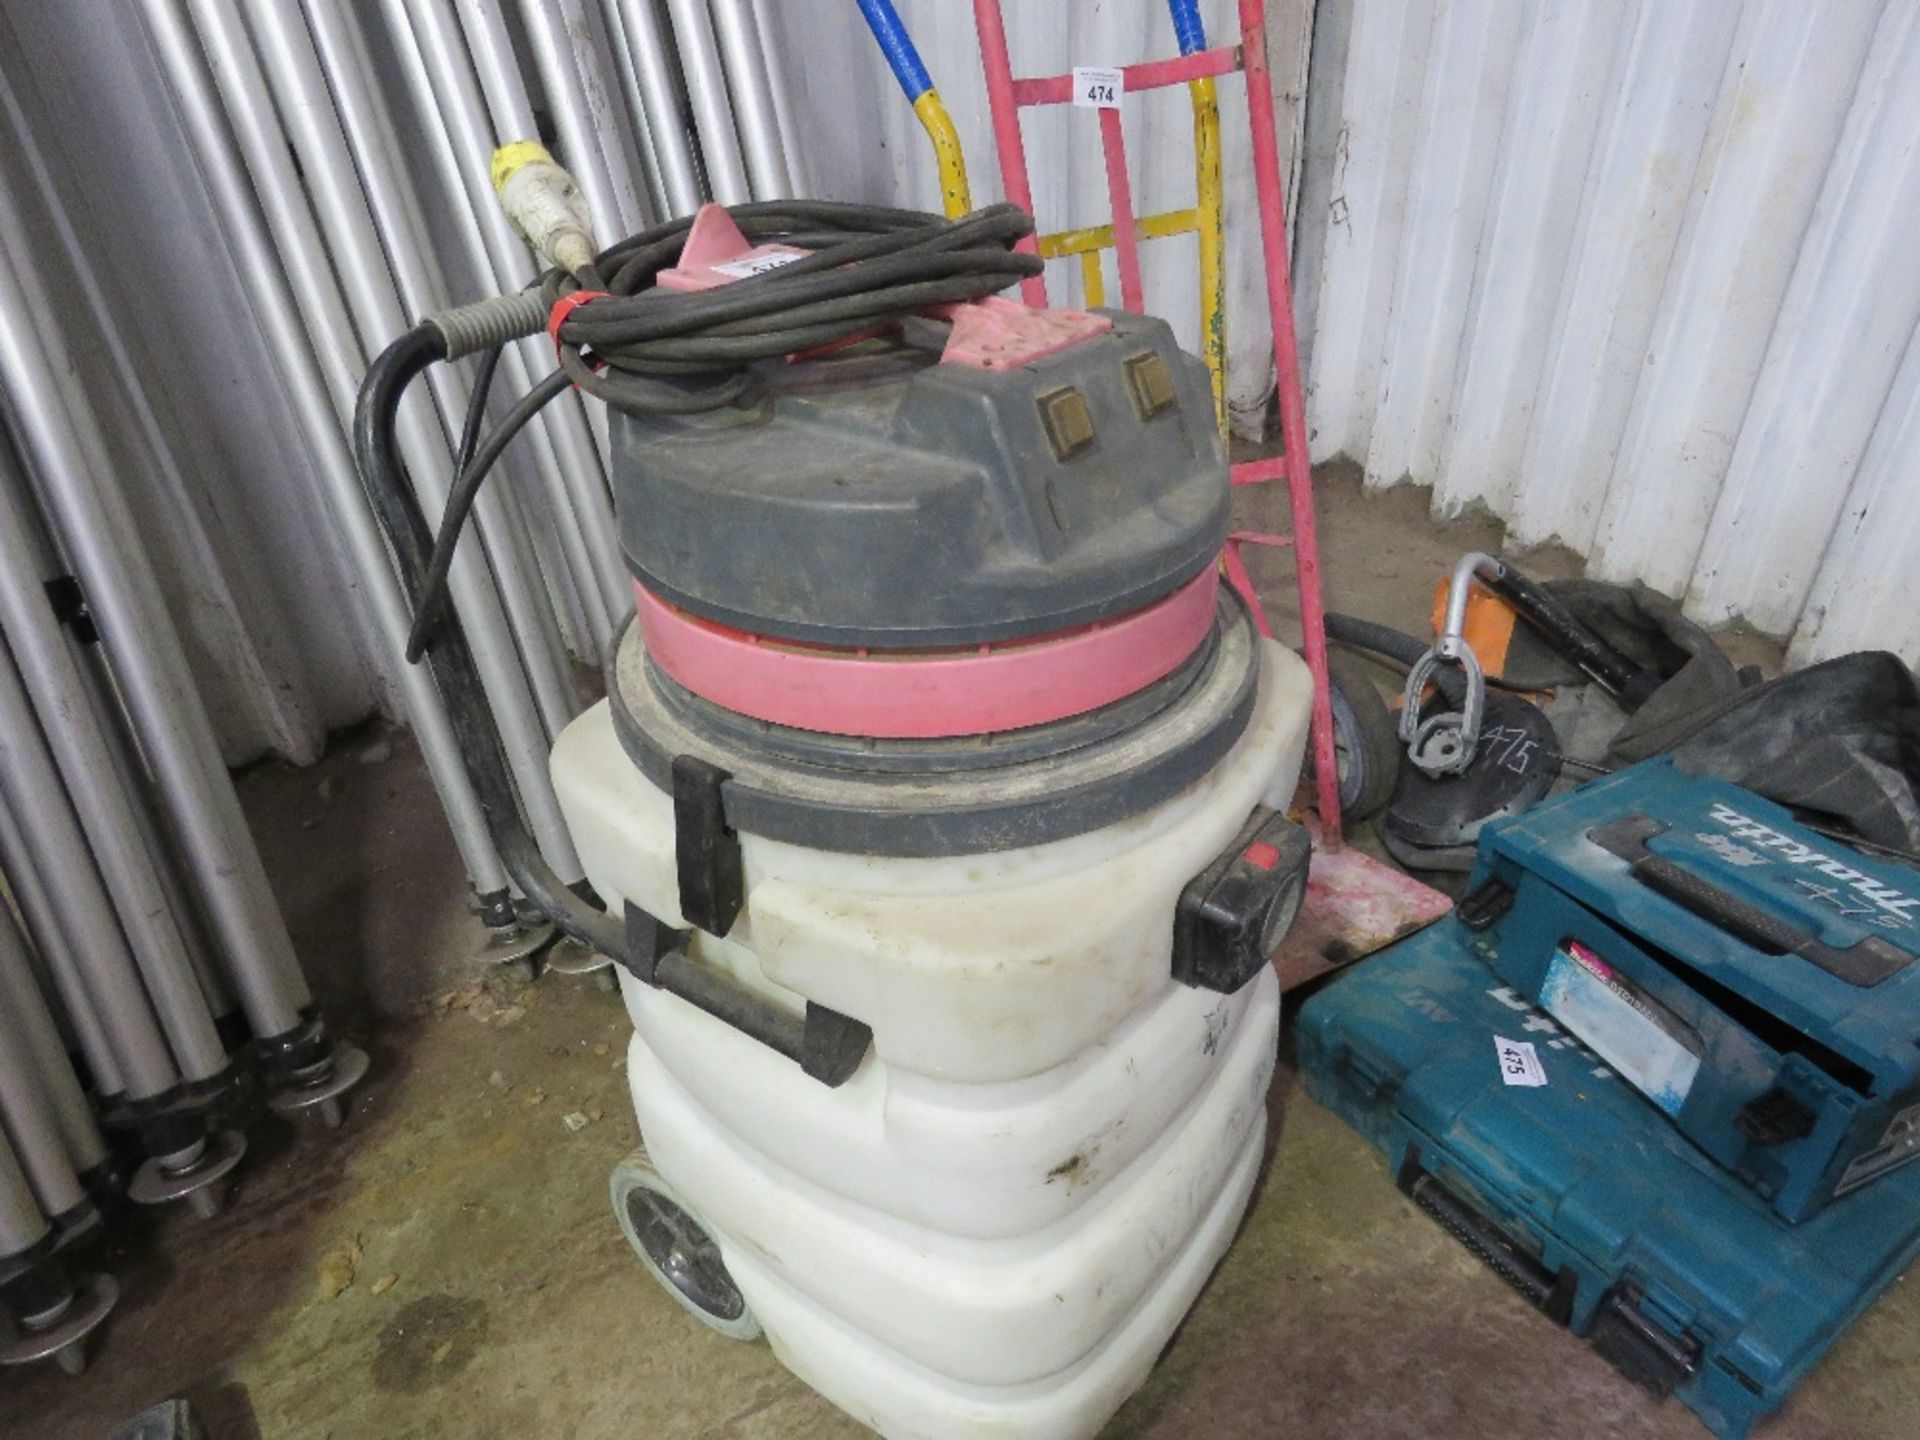 LARGE 110VOLT POWERED INDUSTRIAL VACUUM CLEANER. - Image 2 of 3